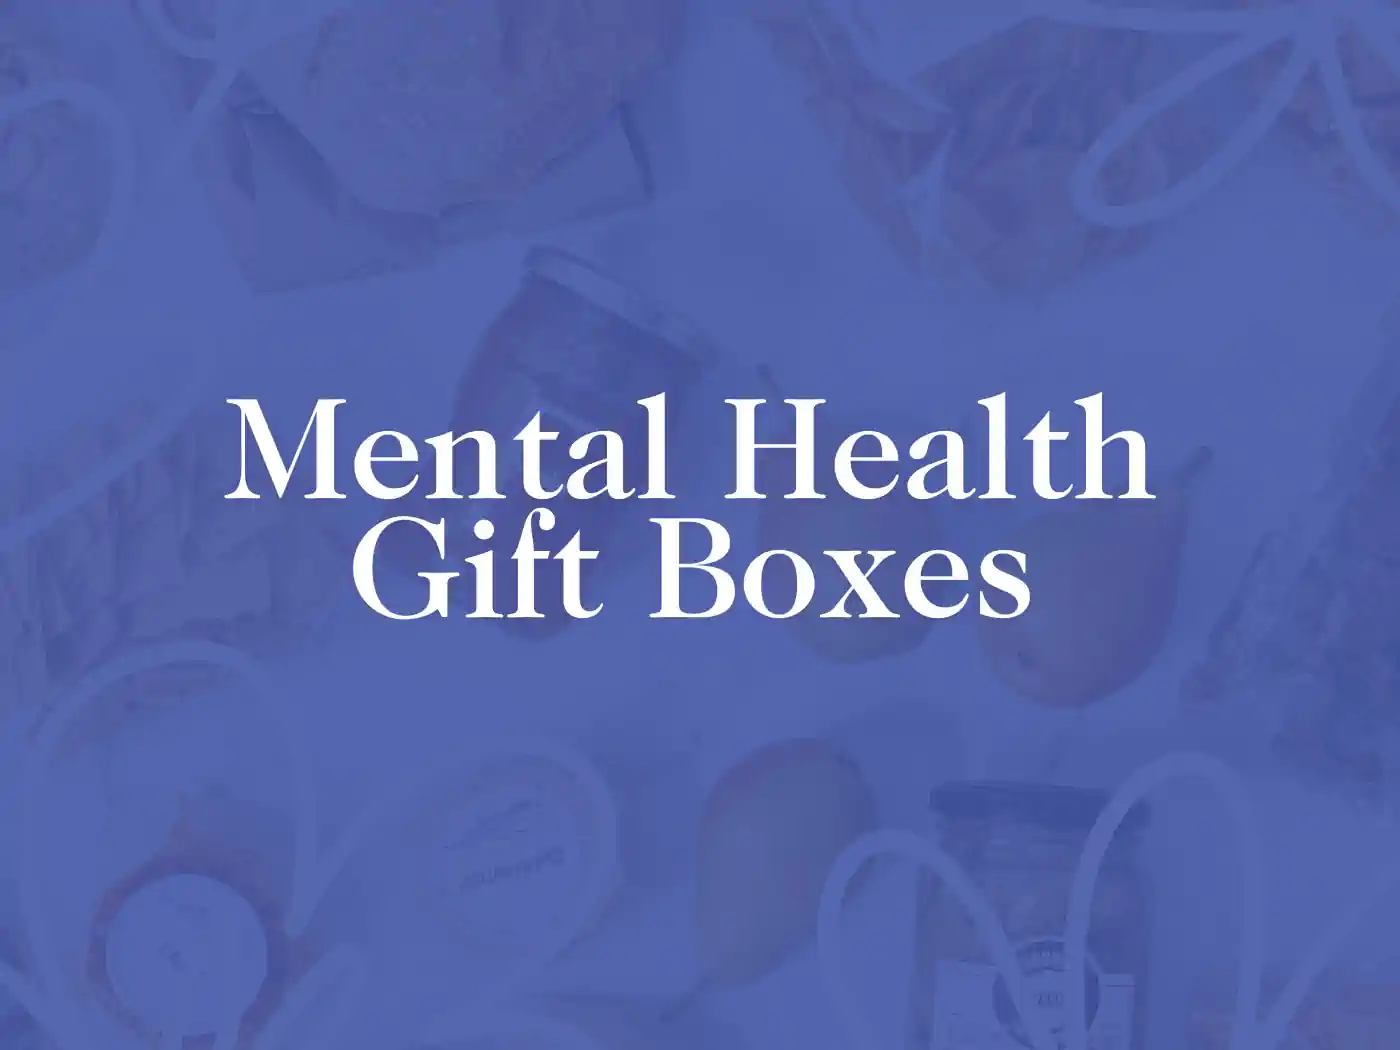 Promotional image for Mental Health Gift Boxes with the text prominently displayed over a subtle background of wellness products, part of the offerings from Fabulous Flowers and Gifts. Thoughtfully curated to promote mental well-being, delivered with compassion and care.